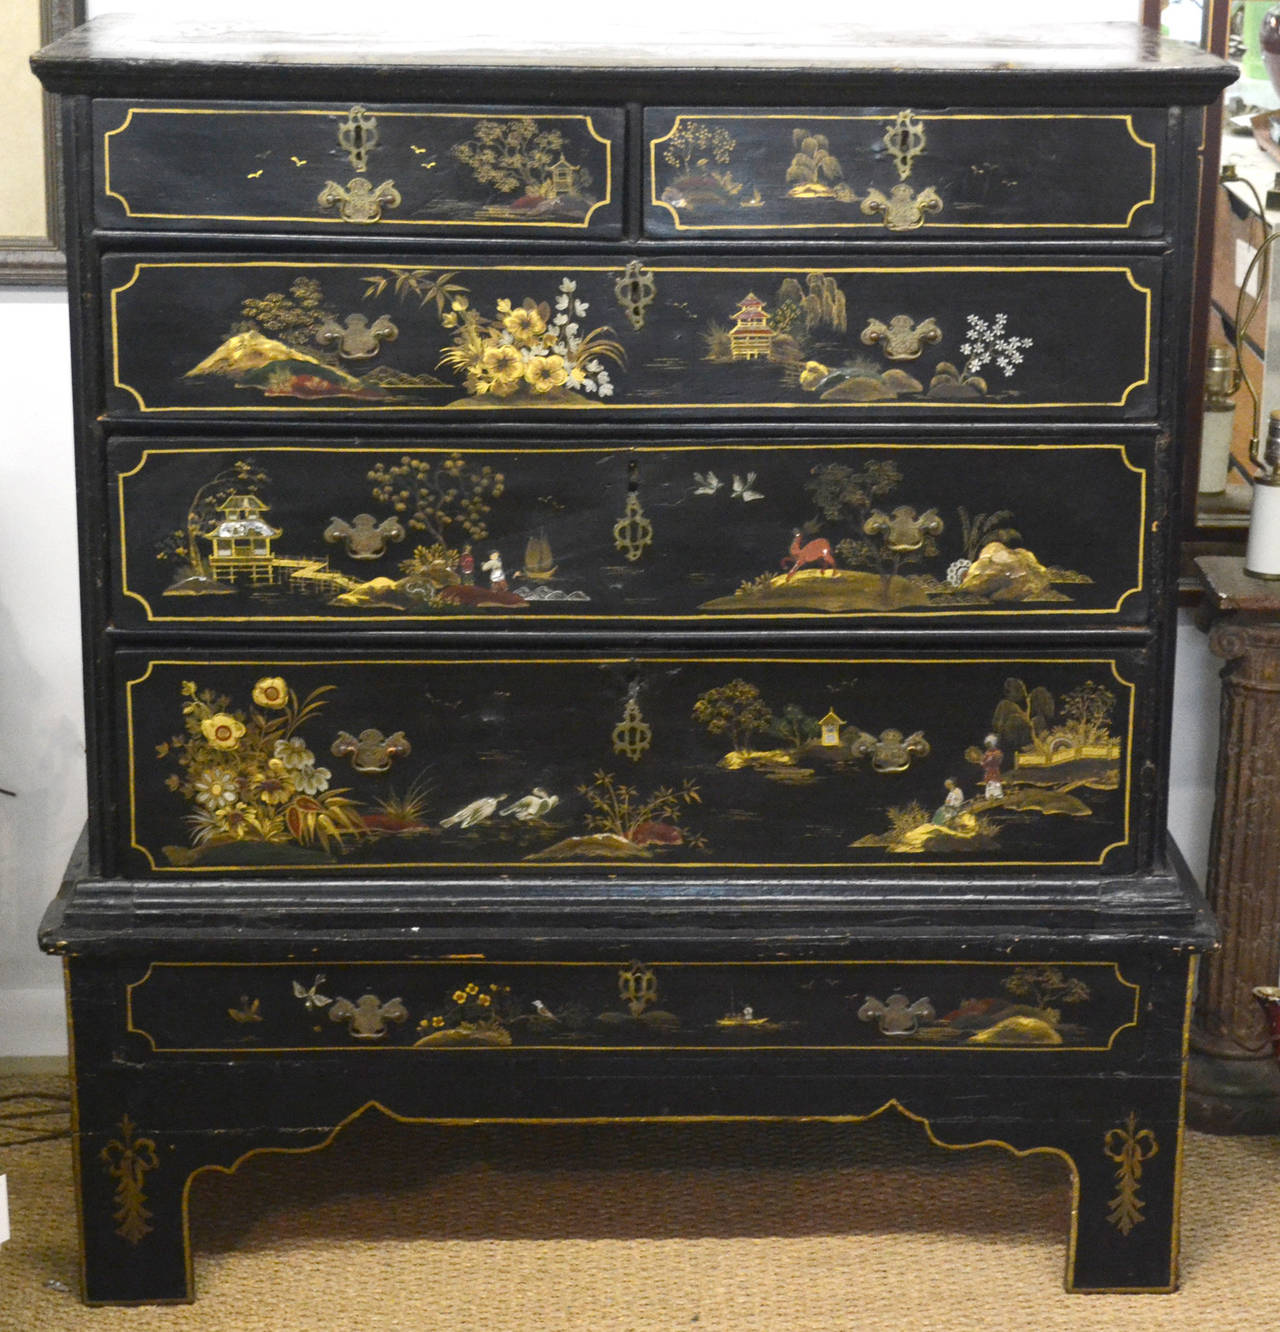 Beautiful chinoiserie detail. Two top drawers over three large dresser drawers.